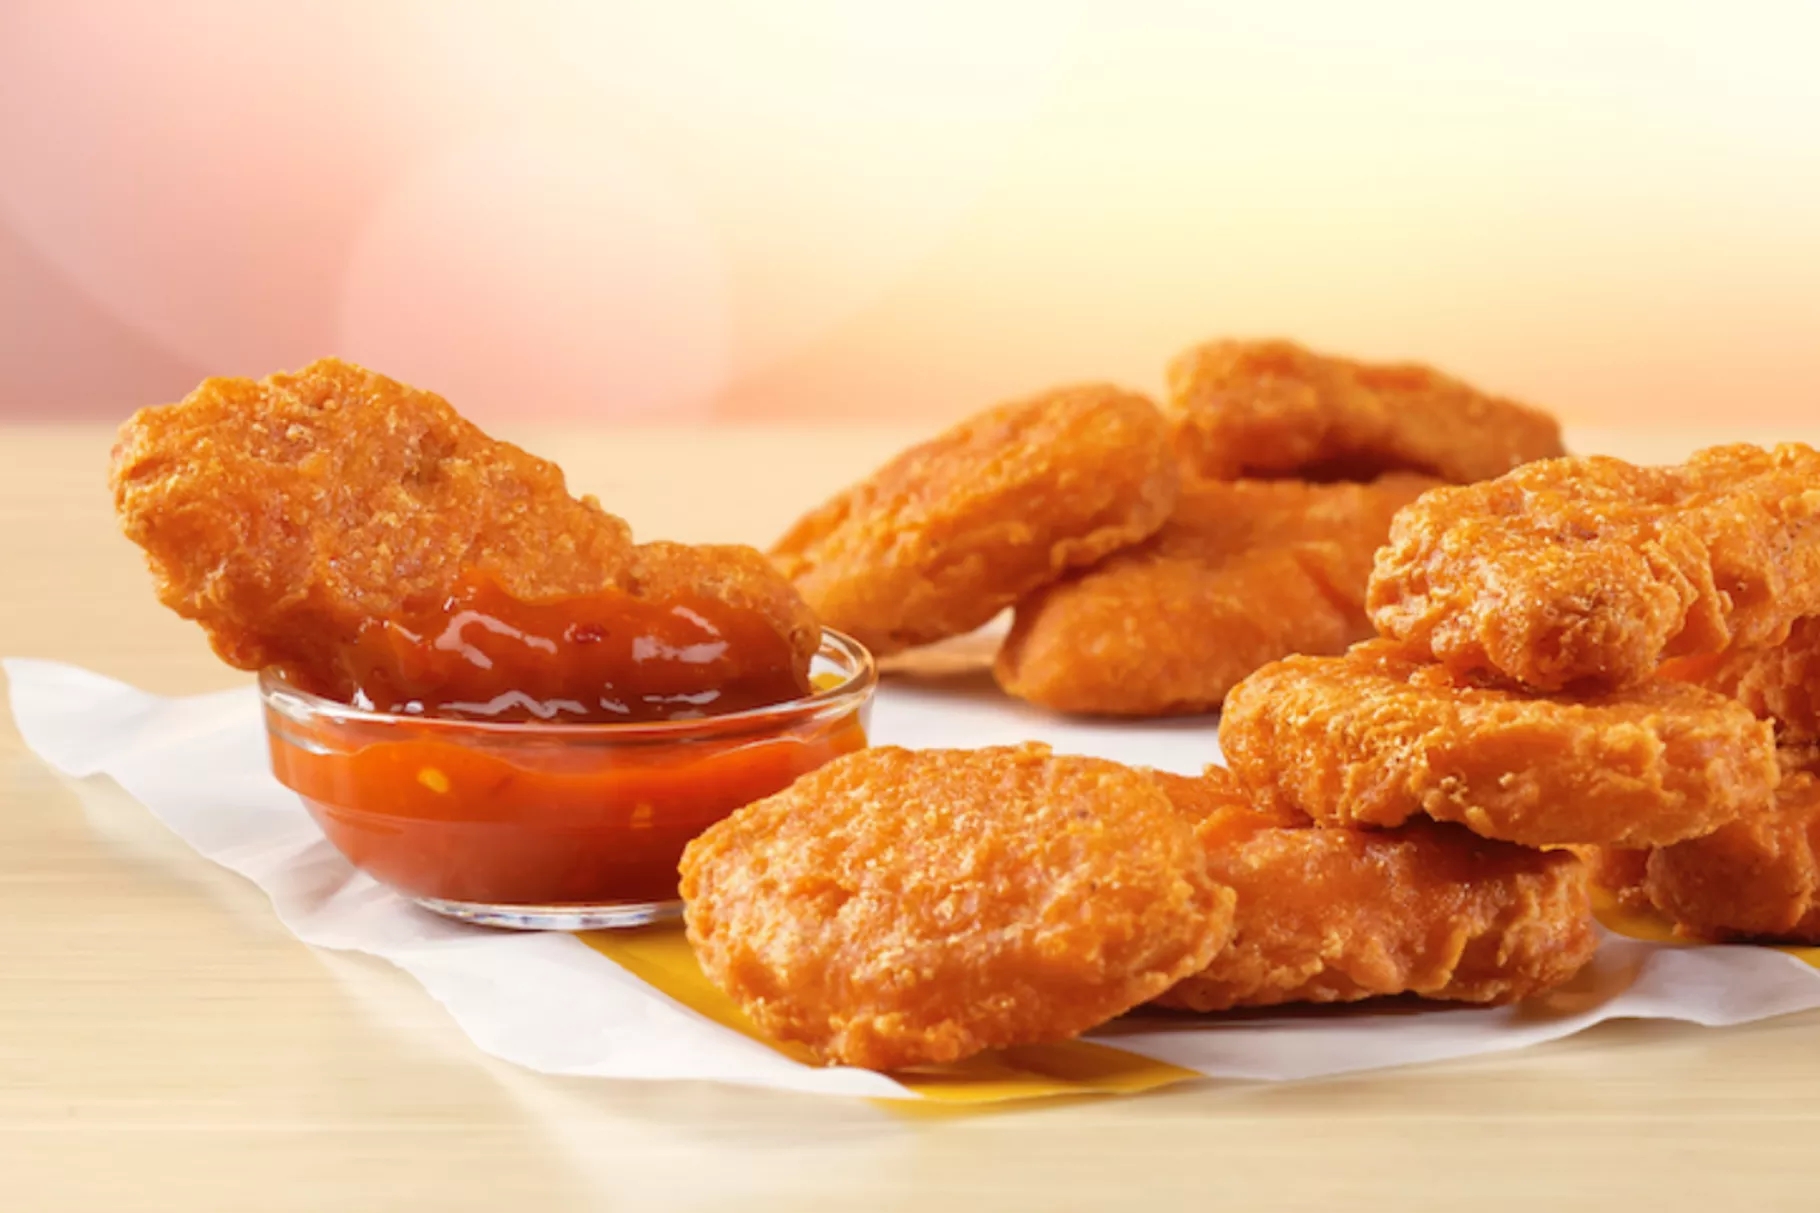 How Does McDonald's New Spicy Chicken McNugget Compare To Wendy's?